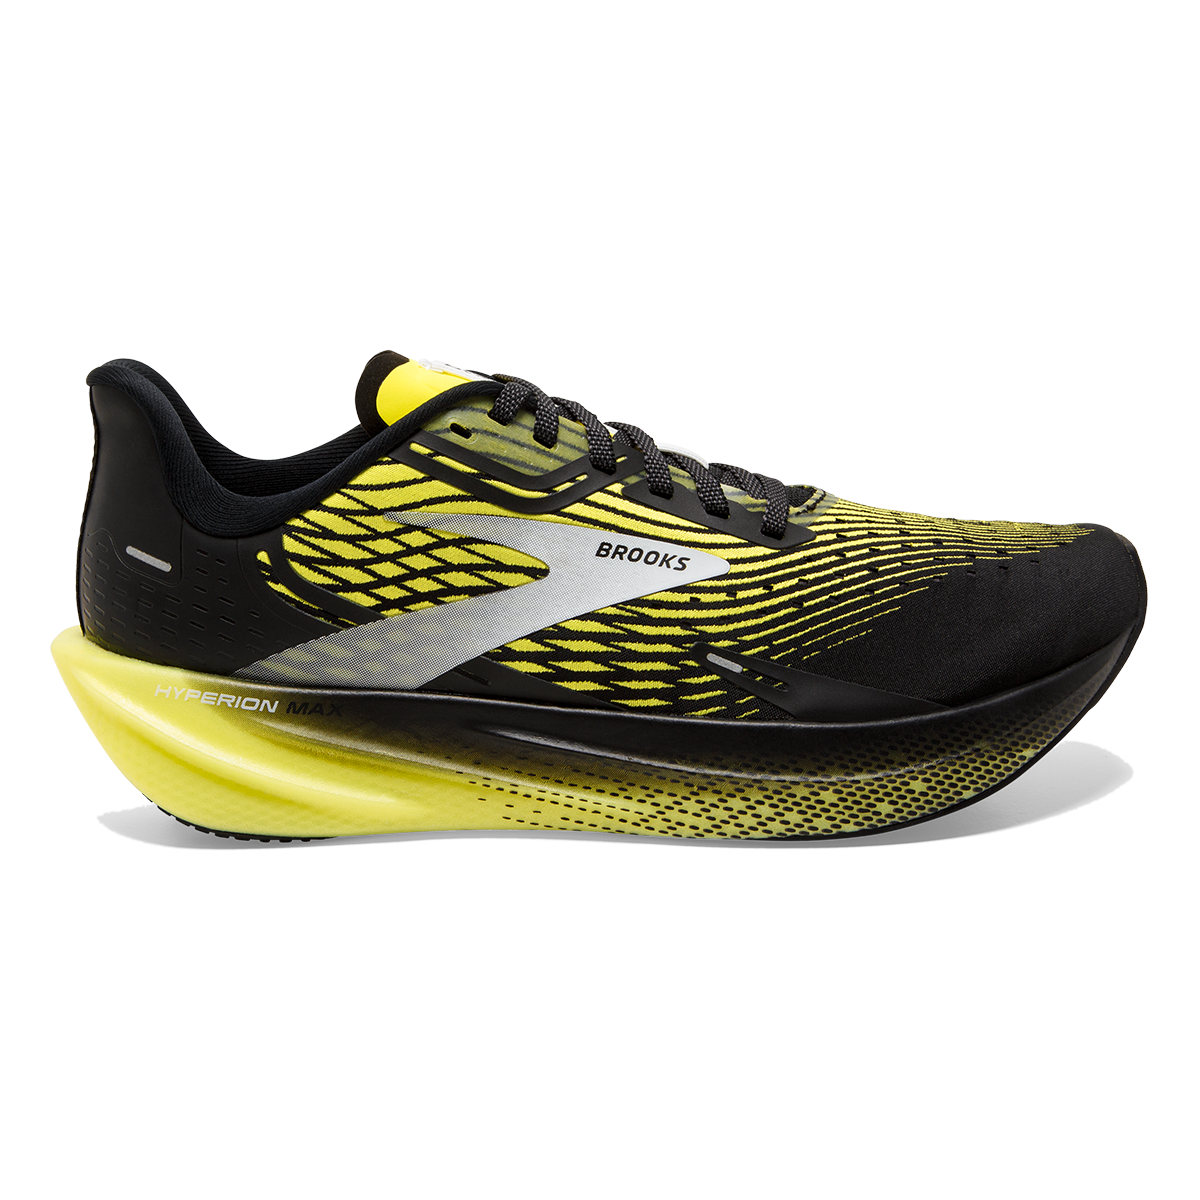 Brooks Hyperion Max, , large image number null